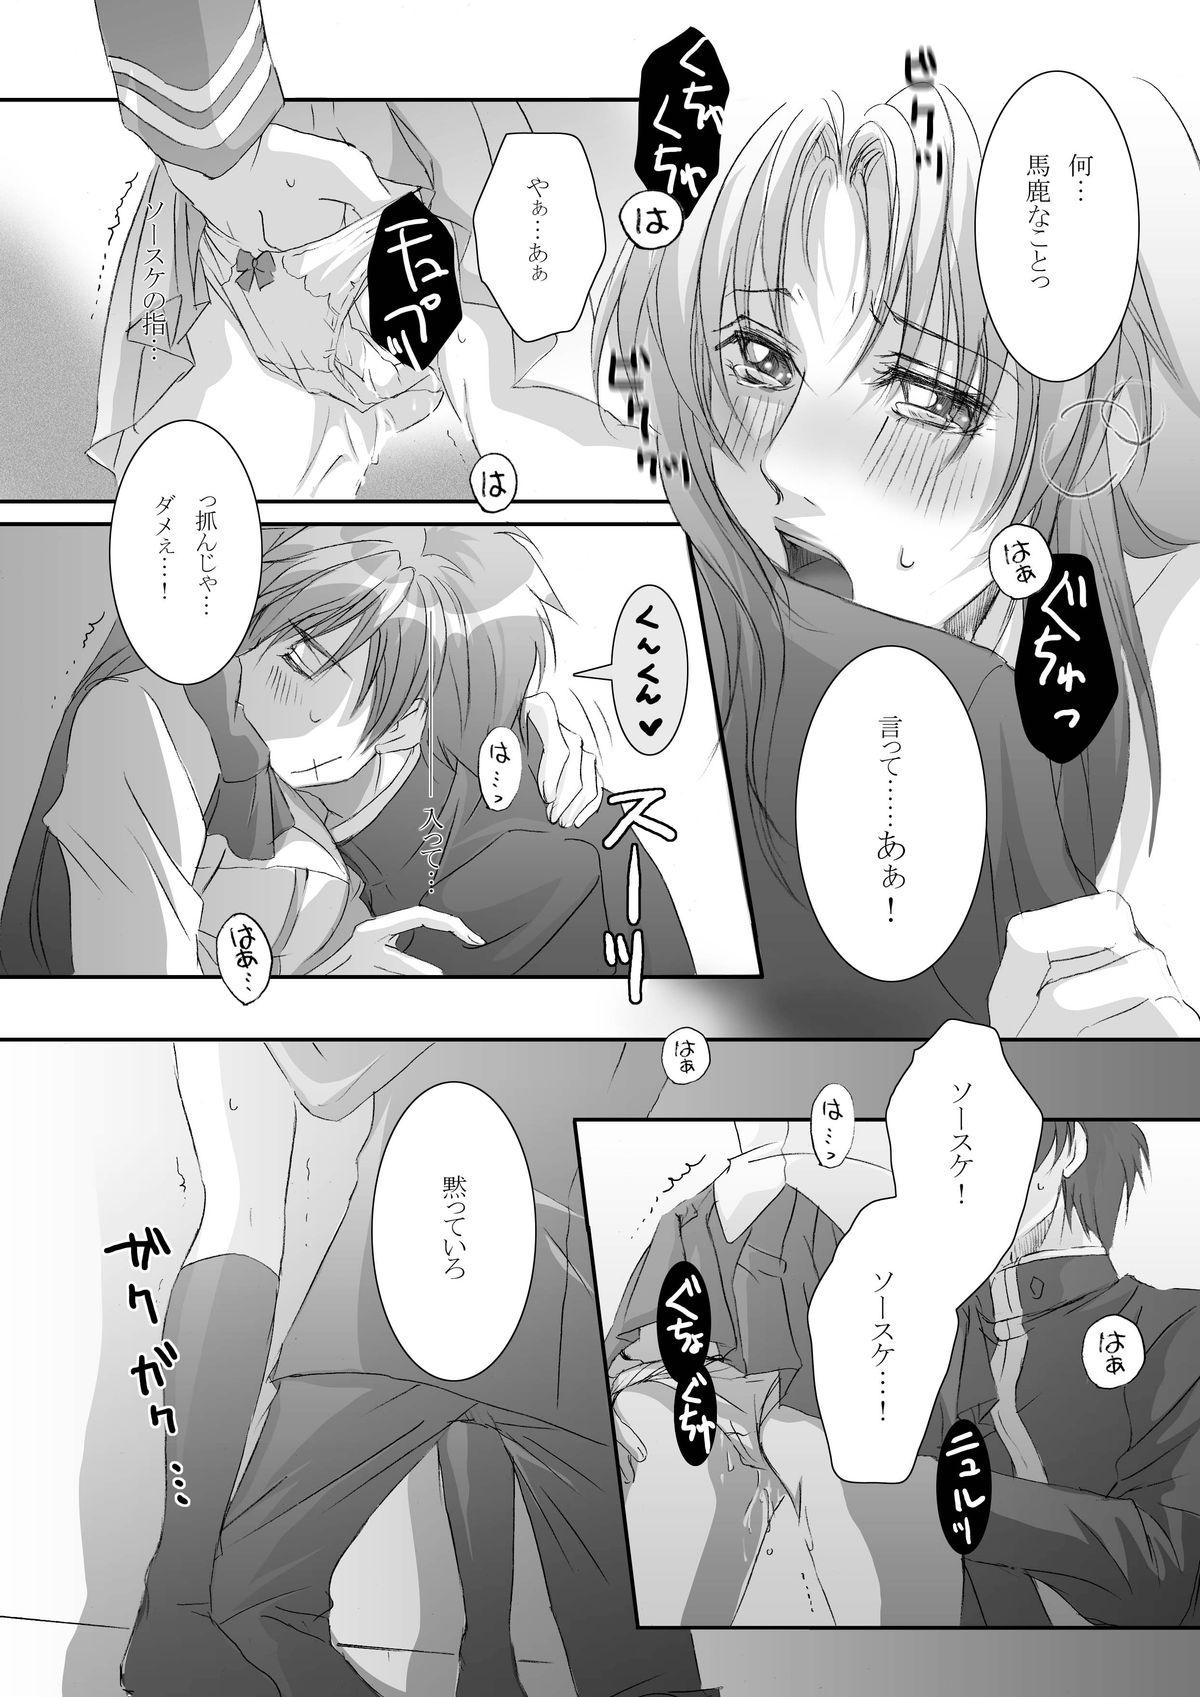 Grosso Anjel Seven A7 - Full metal panic Lesbiansex - Page 11